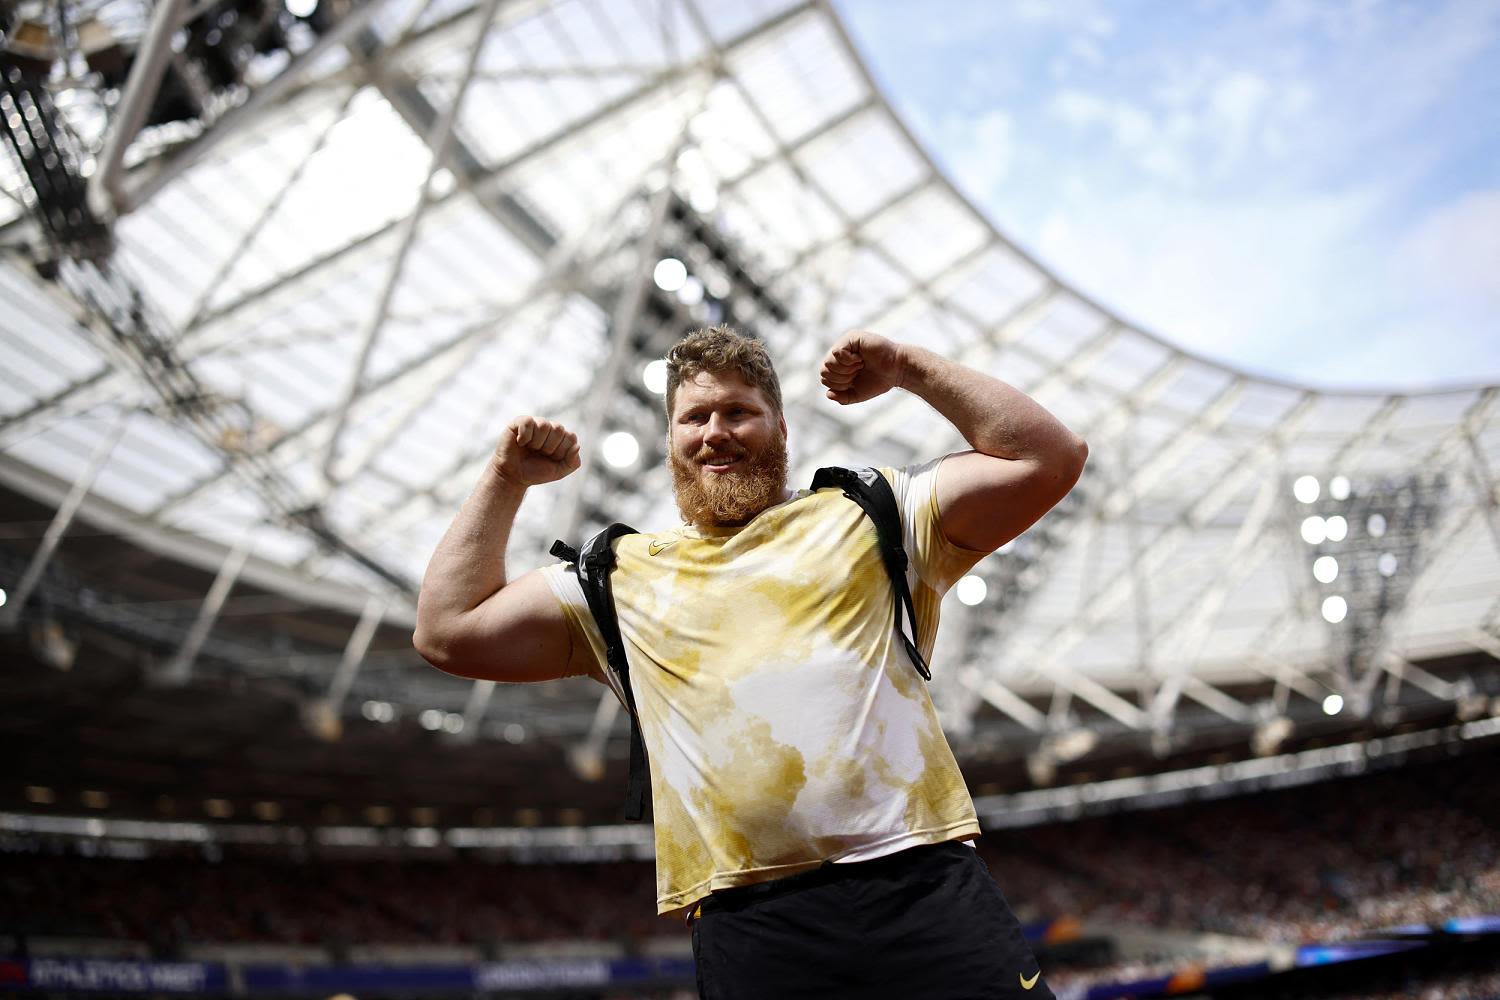 The most dominant shot putter in history eyes a third straight Olympic gold medal – if his body holds up